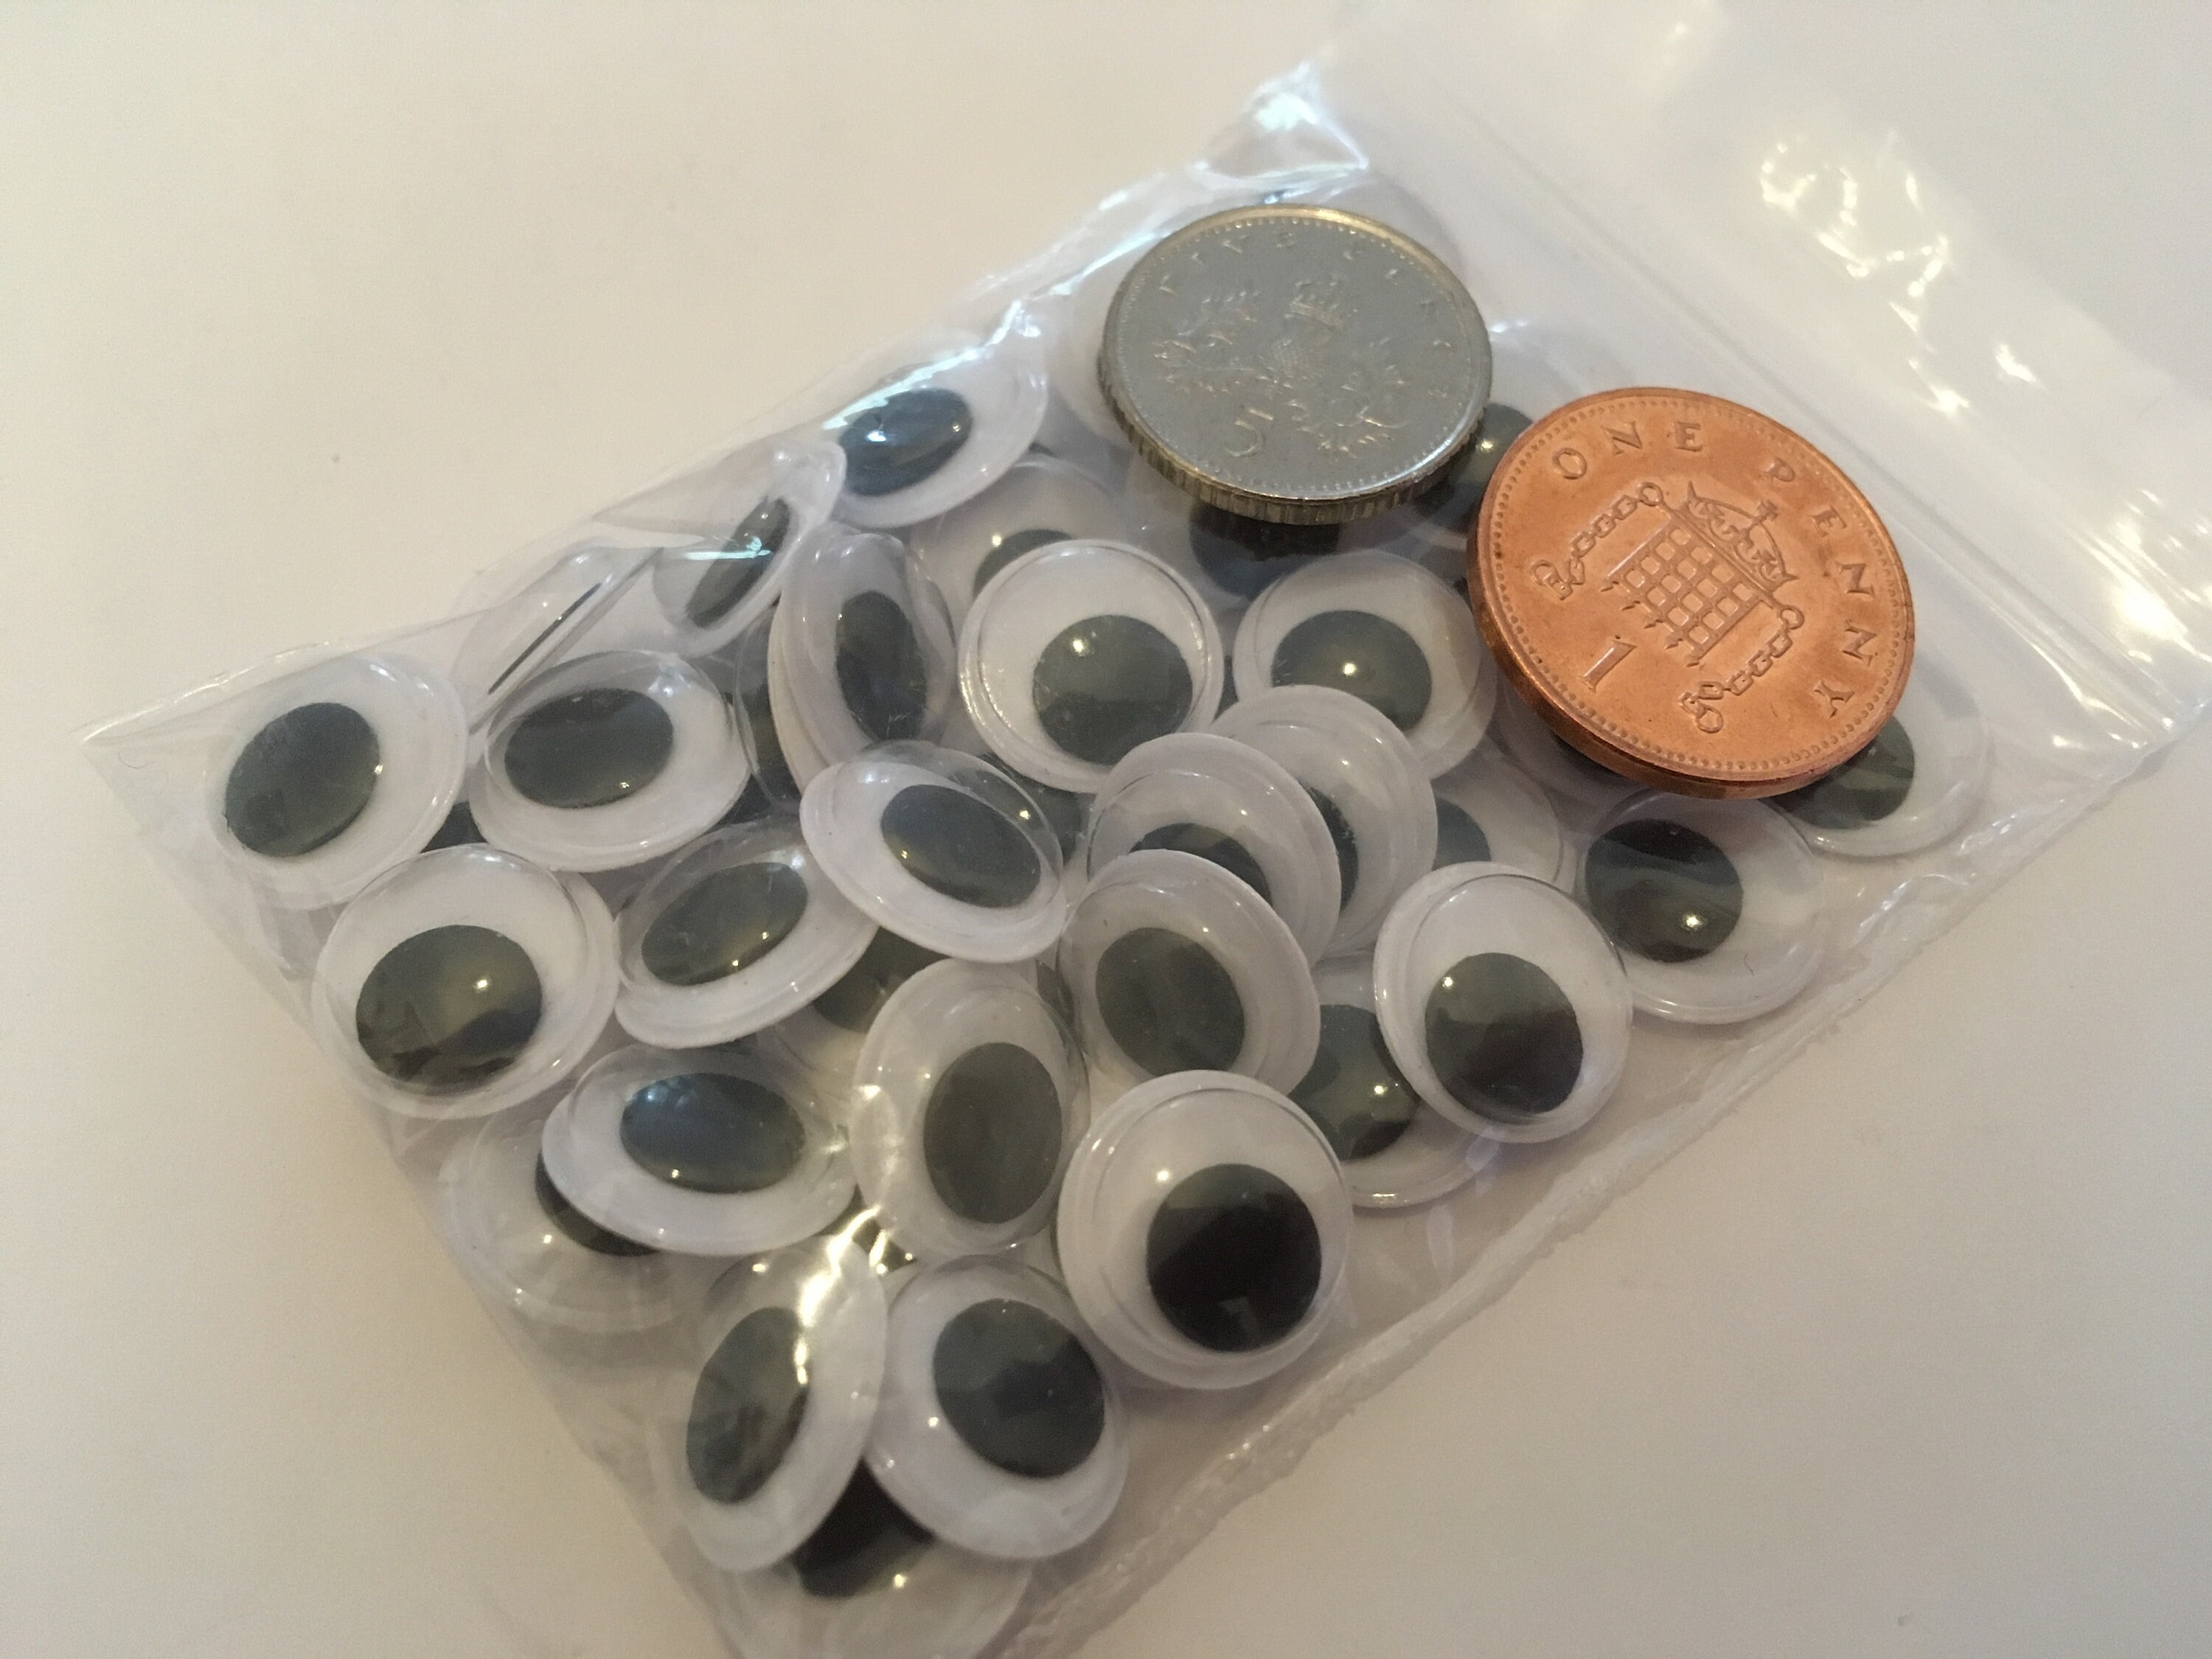 12 - 60 pack, 40mm googly wibbly wiggly wobbly craft eyes, self adhesive